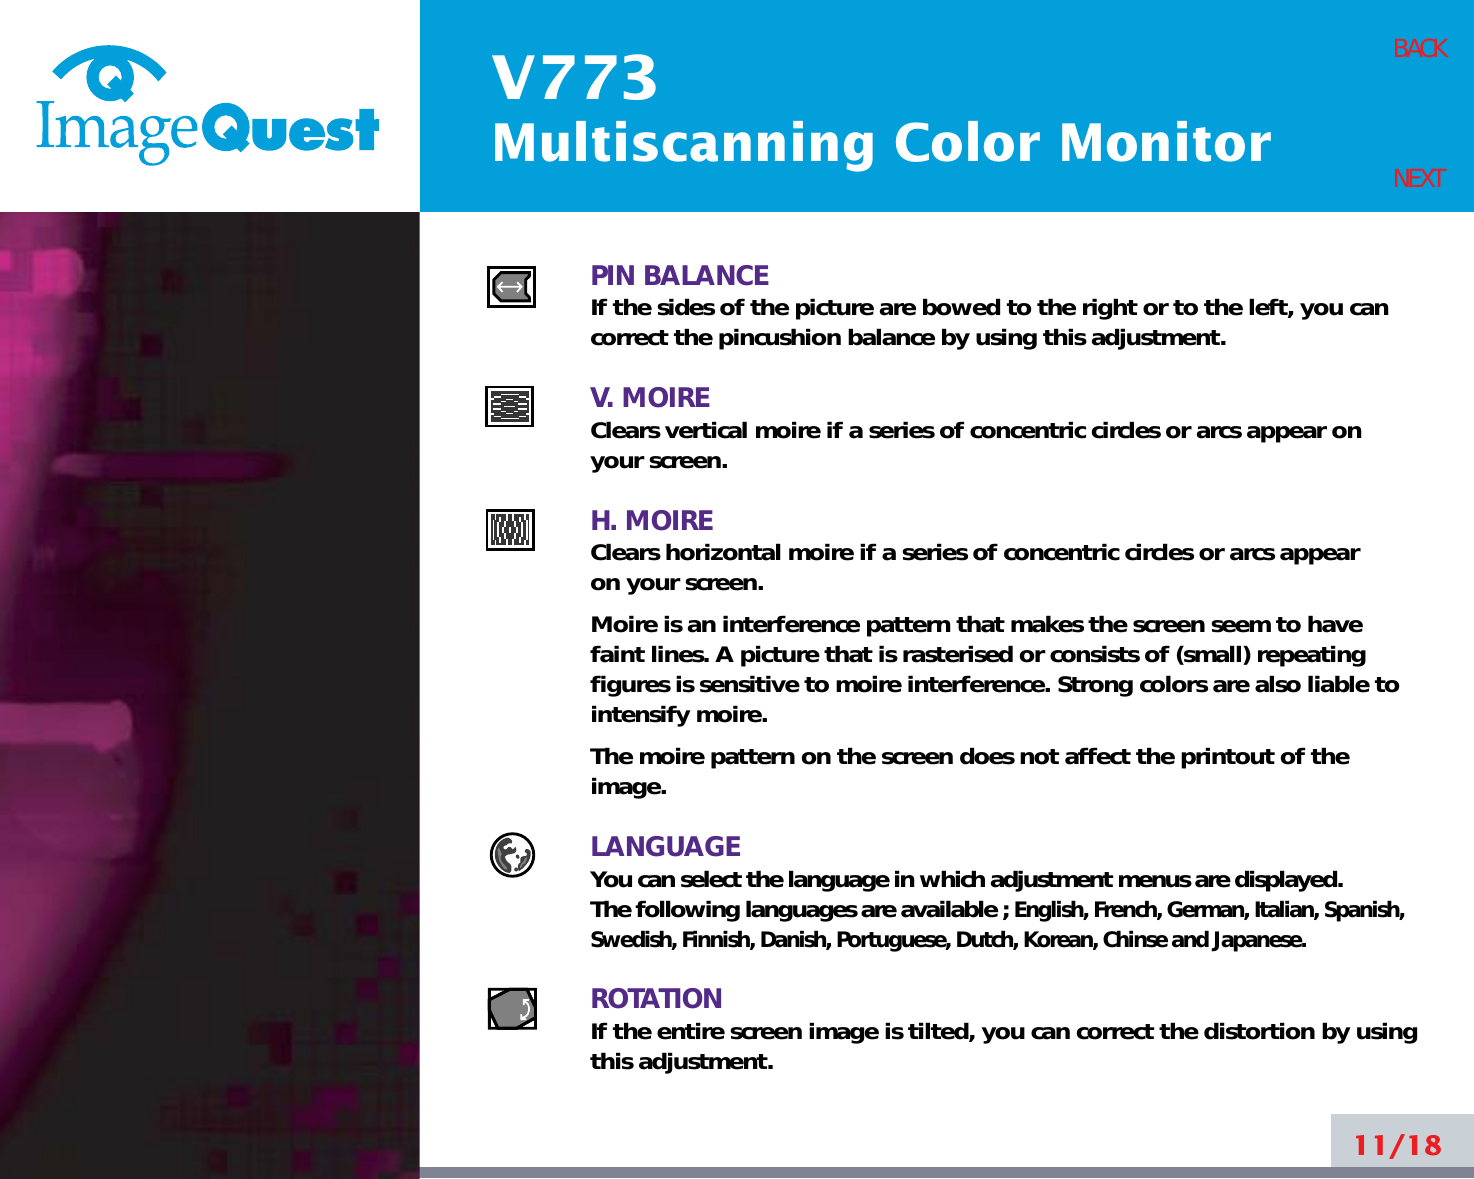 V773Multiscanning Color Monitor11/18BACKNEXTPIN BALANCEIf the sides of the picture are bowed to the right or to the left, you cancorrect the pincushion balance by using this adjustment.V. MOIREClears vertical moire if a series of concentric circles or arcs appear on your screen.H. MOIREClears horizontal moire if a series of concentric circles or arcs appear on your screen.Moire is an interference pattern that makes the screen seem to havefaint lines. A picture that is rasterised or consists of (small) repeatingfigures is sensitive to moire interference. Strong colors are also liable tointensify moire. The moire pattern on the screen does not affect the printout of theimage.LANGUAGEYou can select the language in which adjustment menus are displayed.The following languages are available ; English, French, German, Italian, Spanish,Swedish, Finnish, Danish, Portuguese, Dutch, Korean, Chinse and Japanese.ROTATIONIf the entire screen image is tilted, you can correct the distortion by usingthis adjustment.